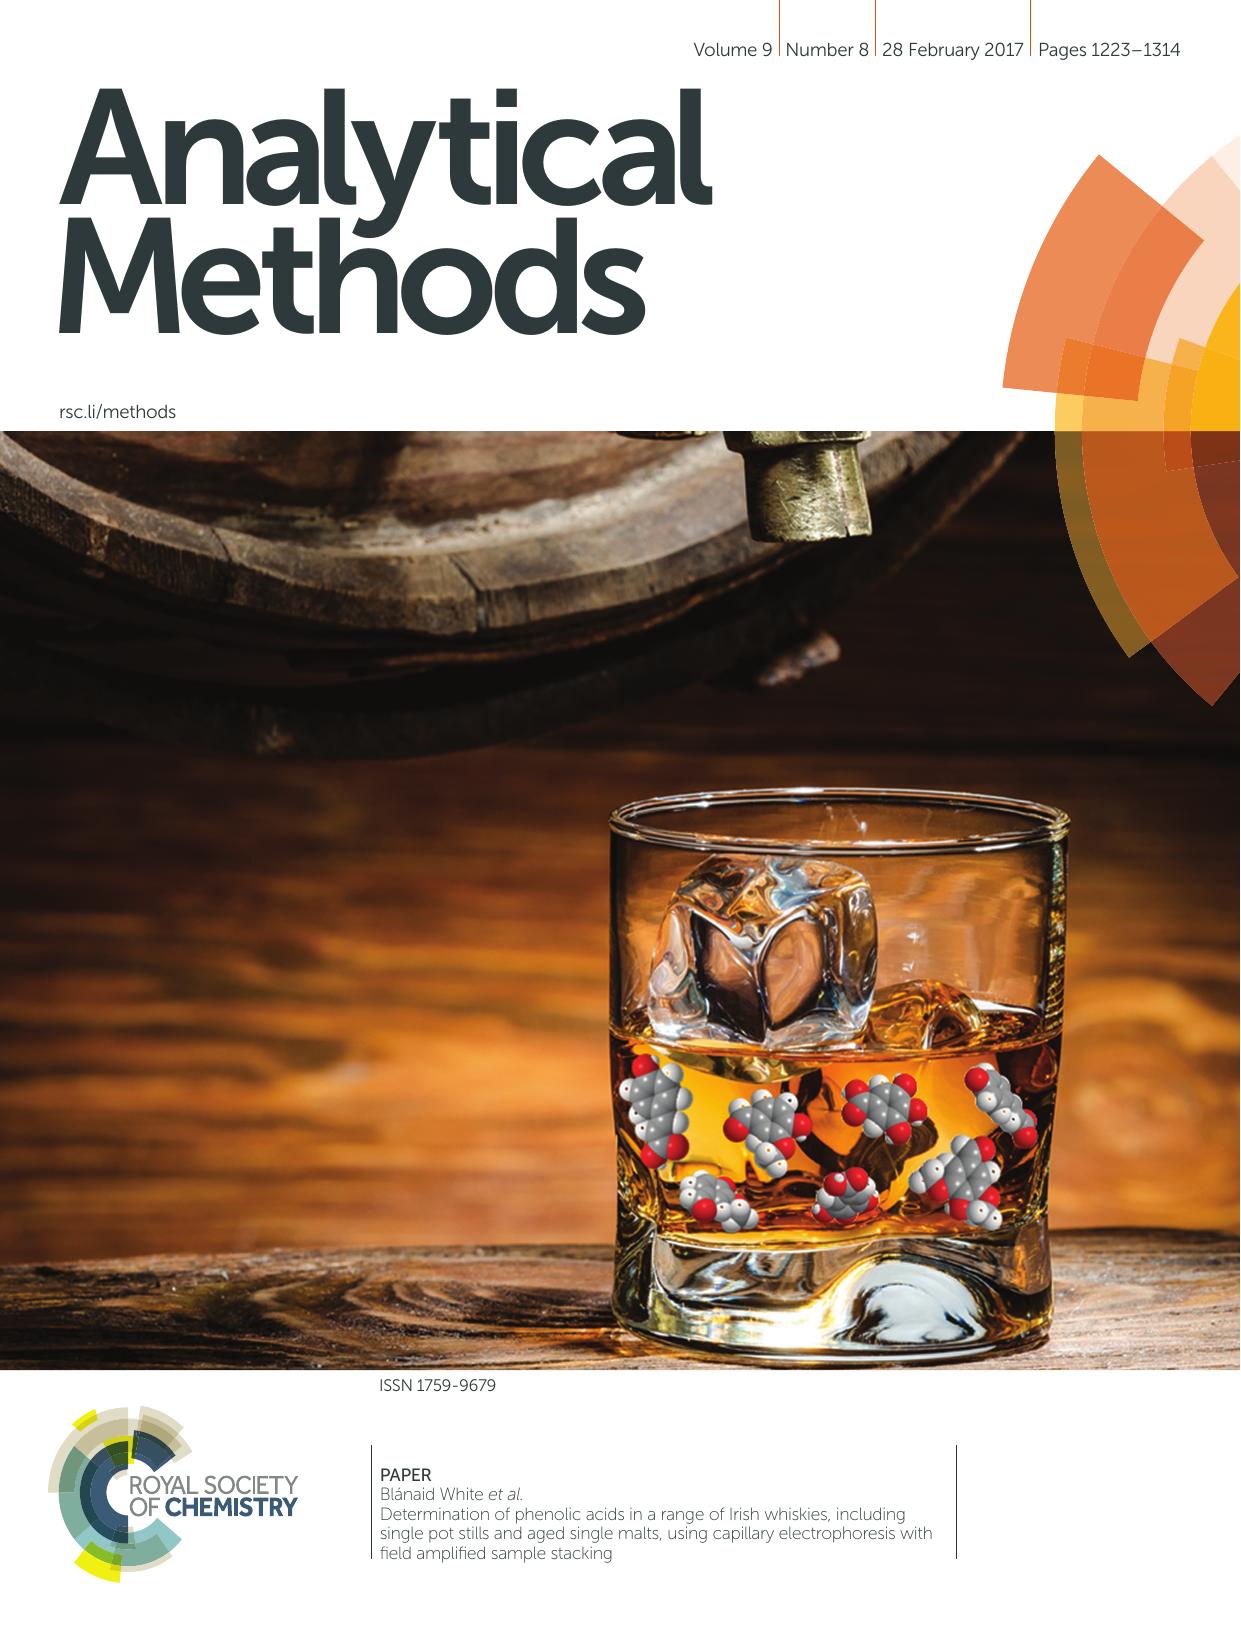 Determination of phenolic acids in a range of Irish whiskies, including single pot stills and aged single malts, using capillary electrophoresis with field amplified sample stacking by Blánaid White & Malcolm R. Smyth & Craig E. Lunte